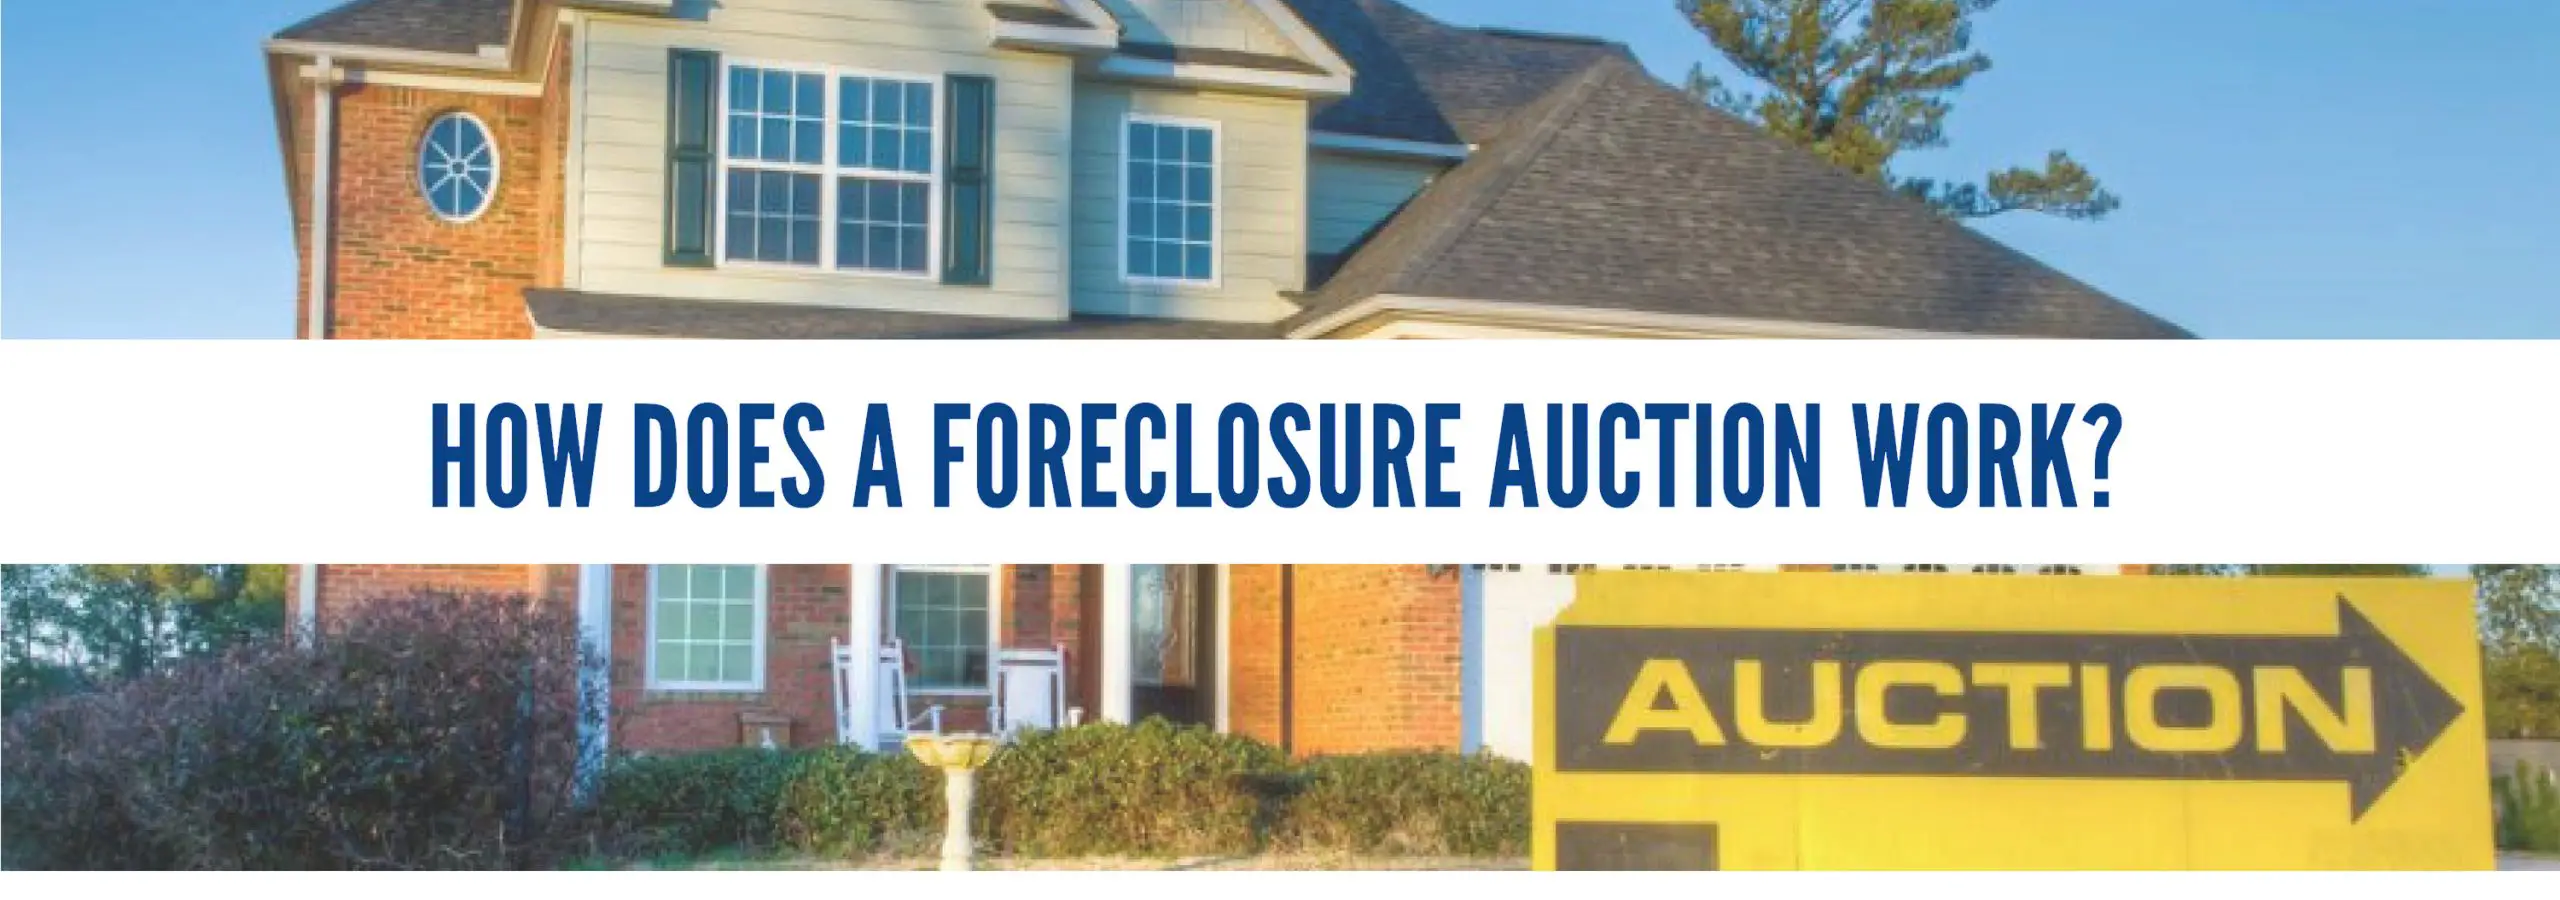 How Does A Foreclosure Auction Work?